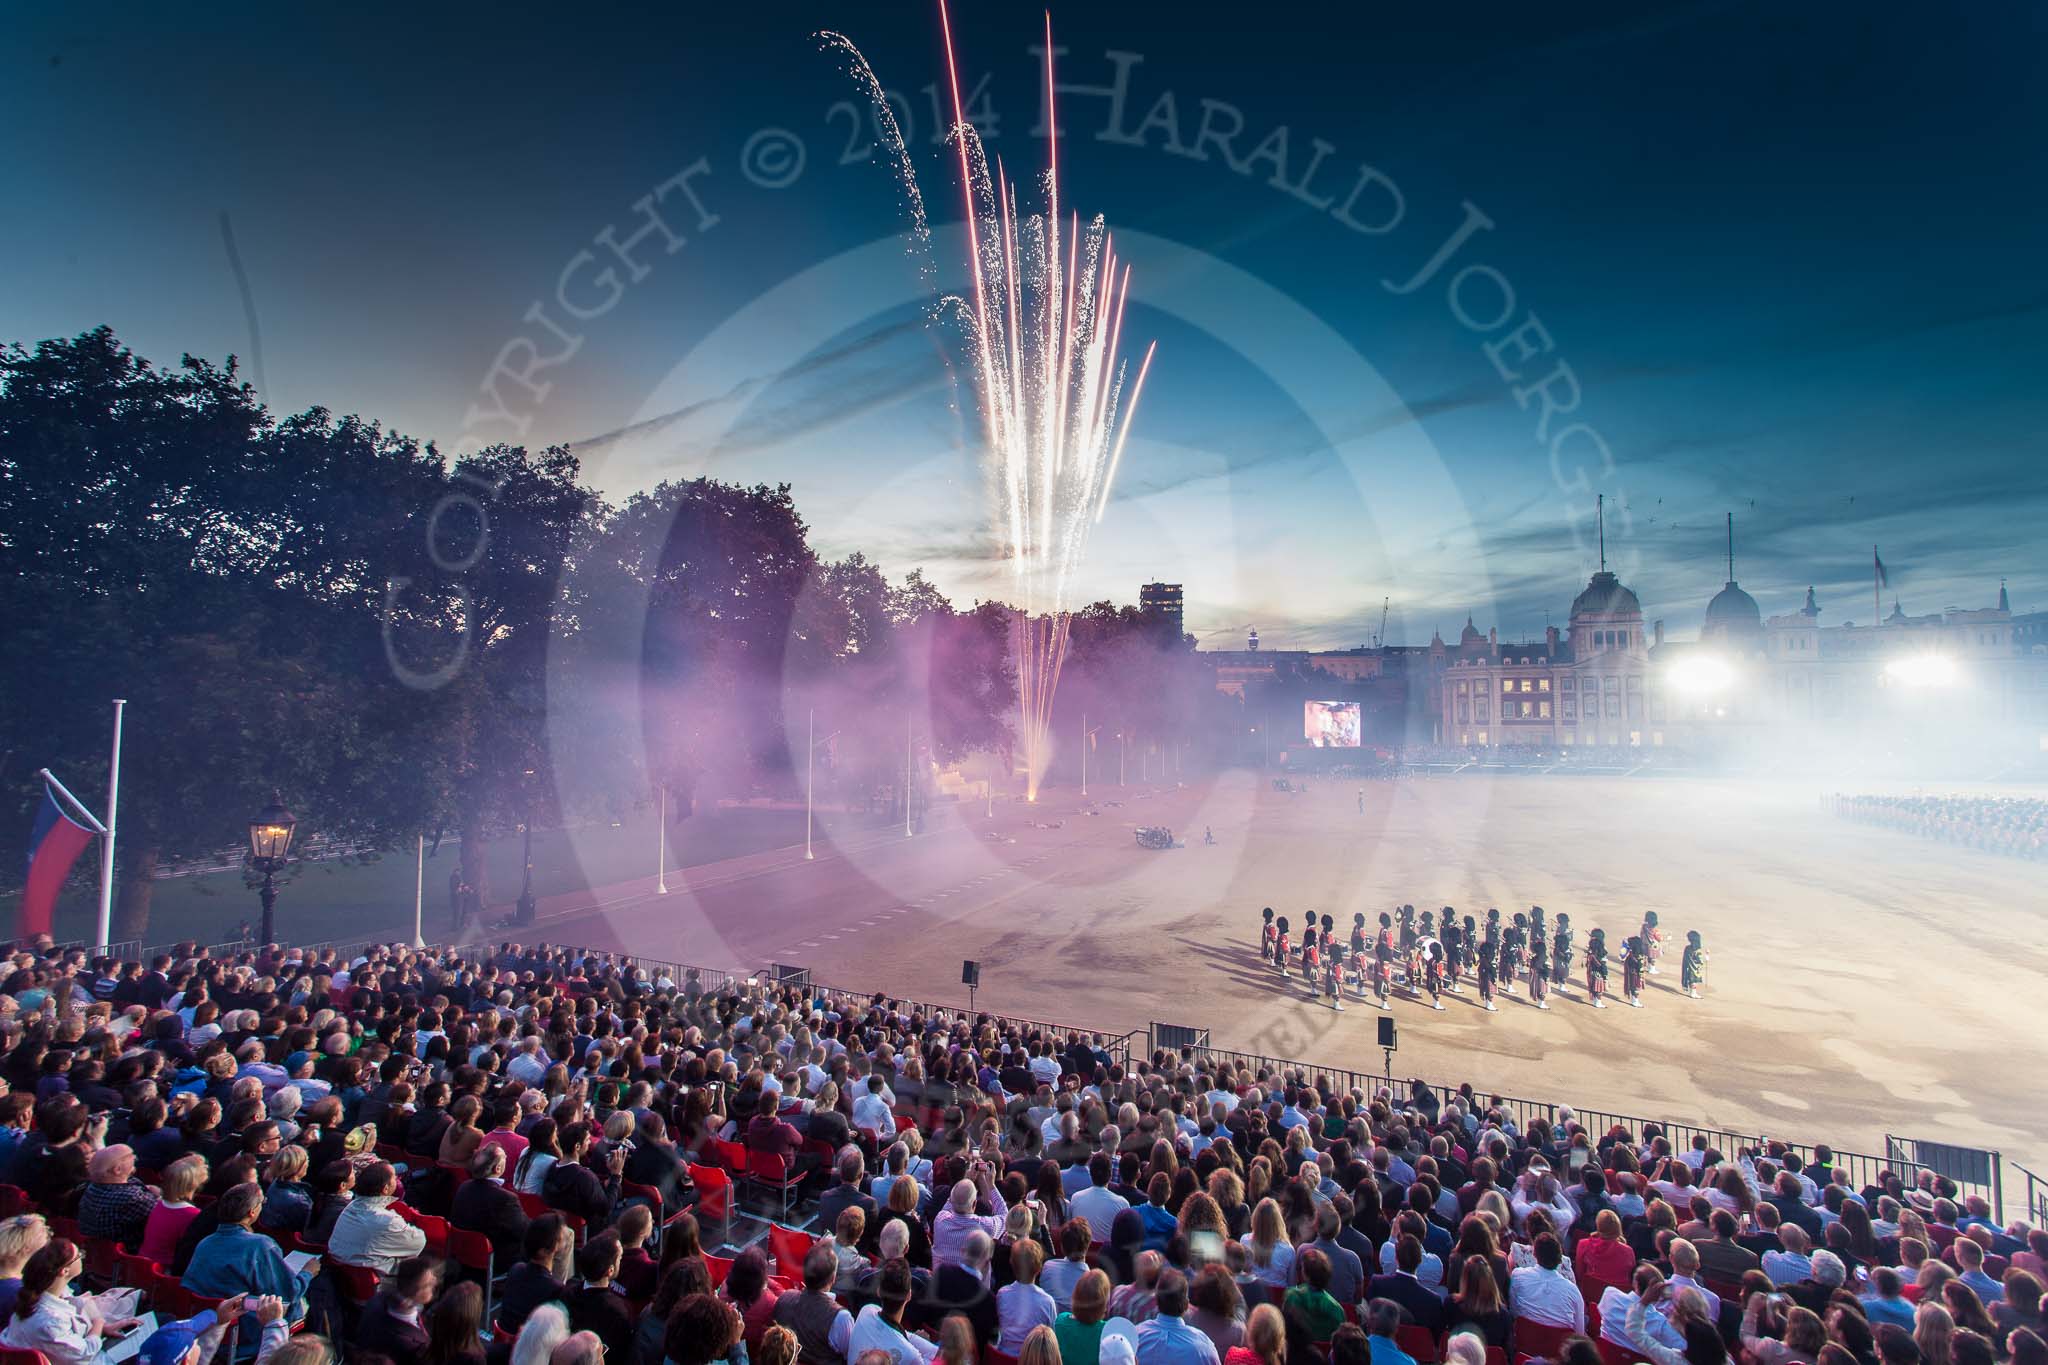 Beating Retreat 2014.
Horse Guards Parade, Westminster,
London SW1A,

United Kingdom,
on 11 June 2014 at 21:43, image #382